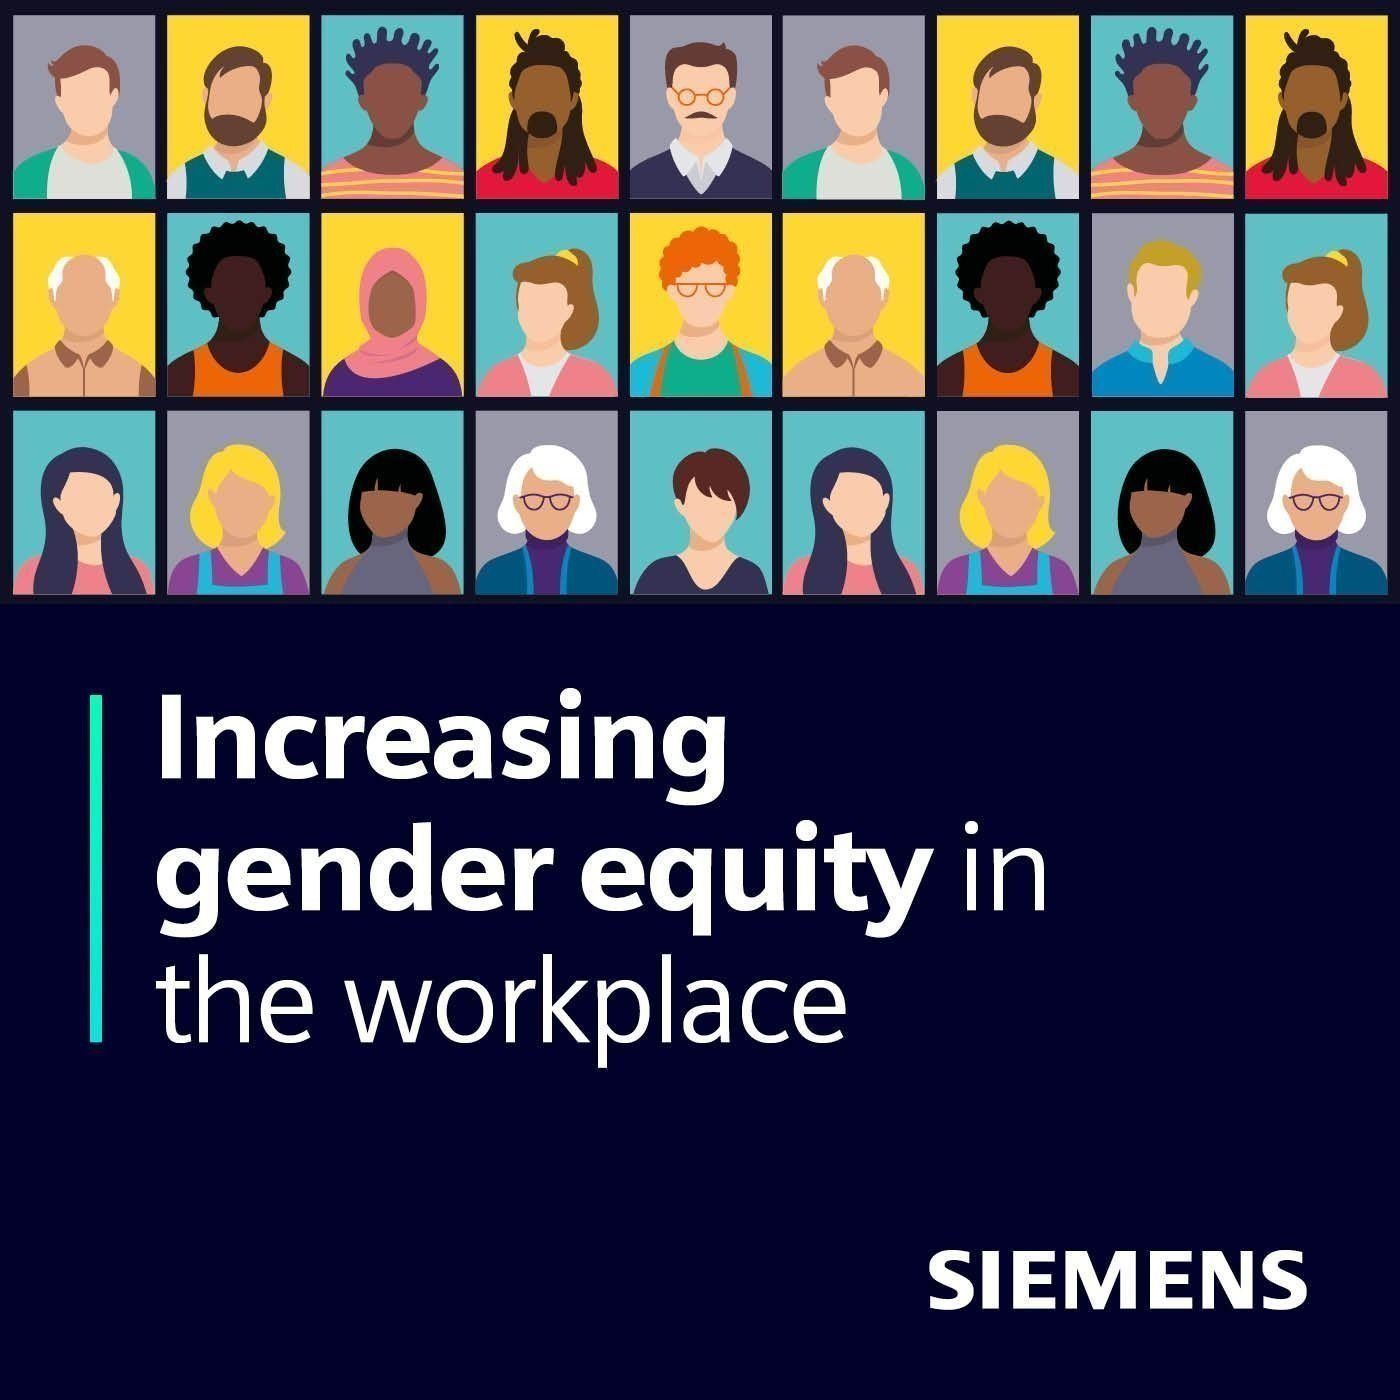 Increasing gender equity in the workplace